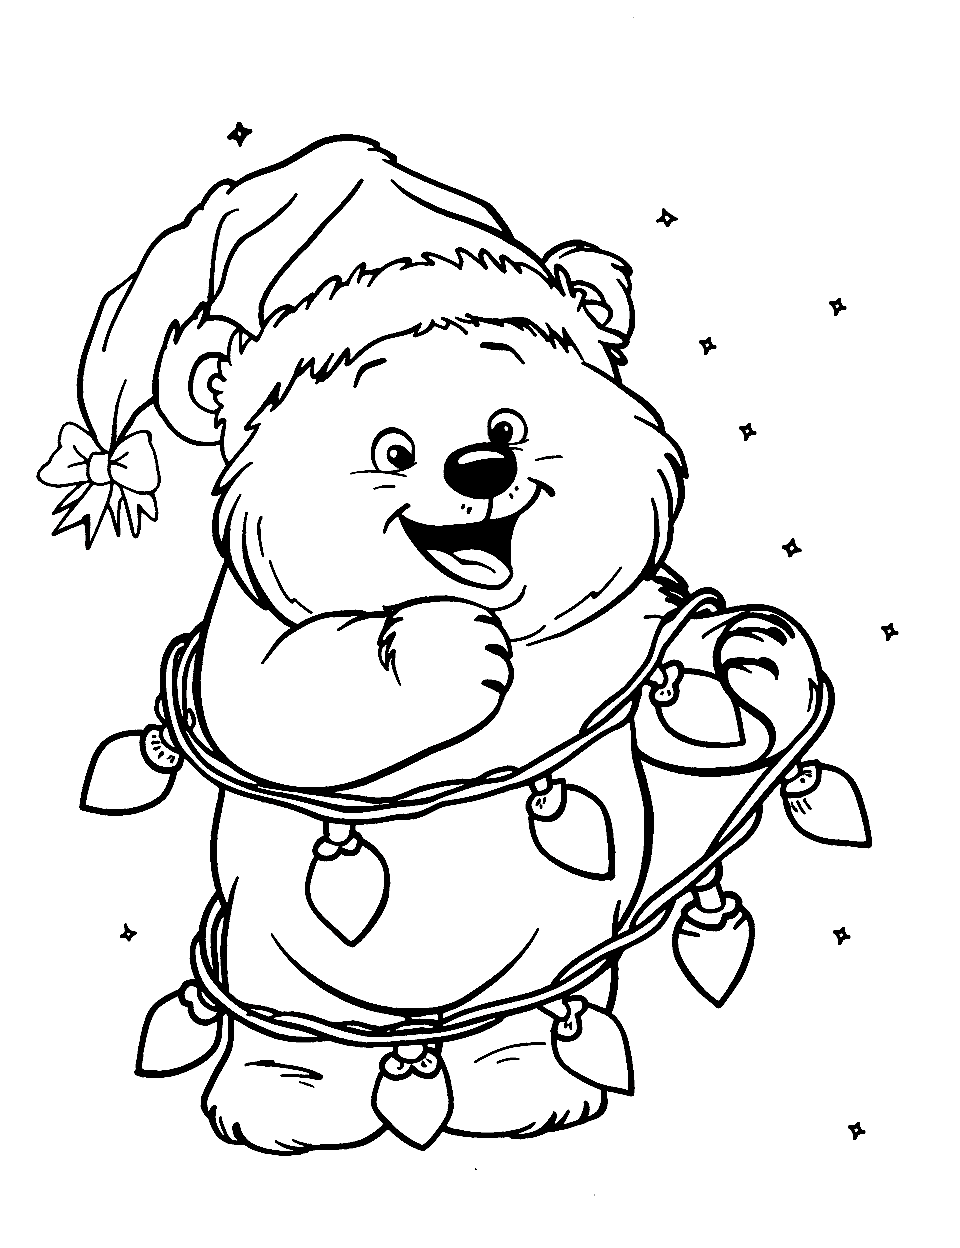 Christmas Teddy Bear Joy Coloring Page - A teddy bear wearing a Santa hat and tangled in Christmas lights.